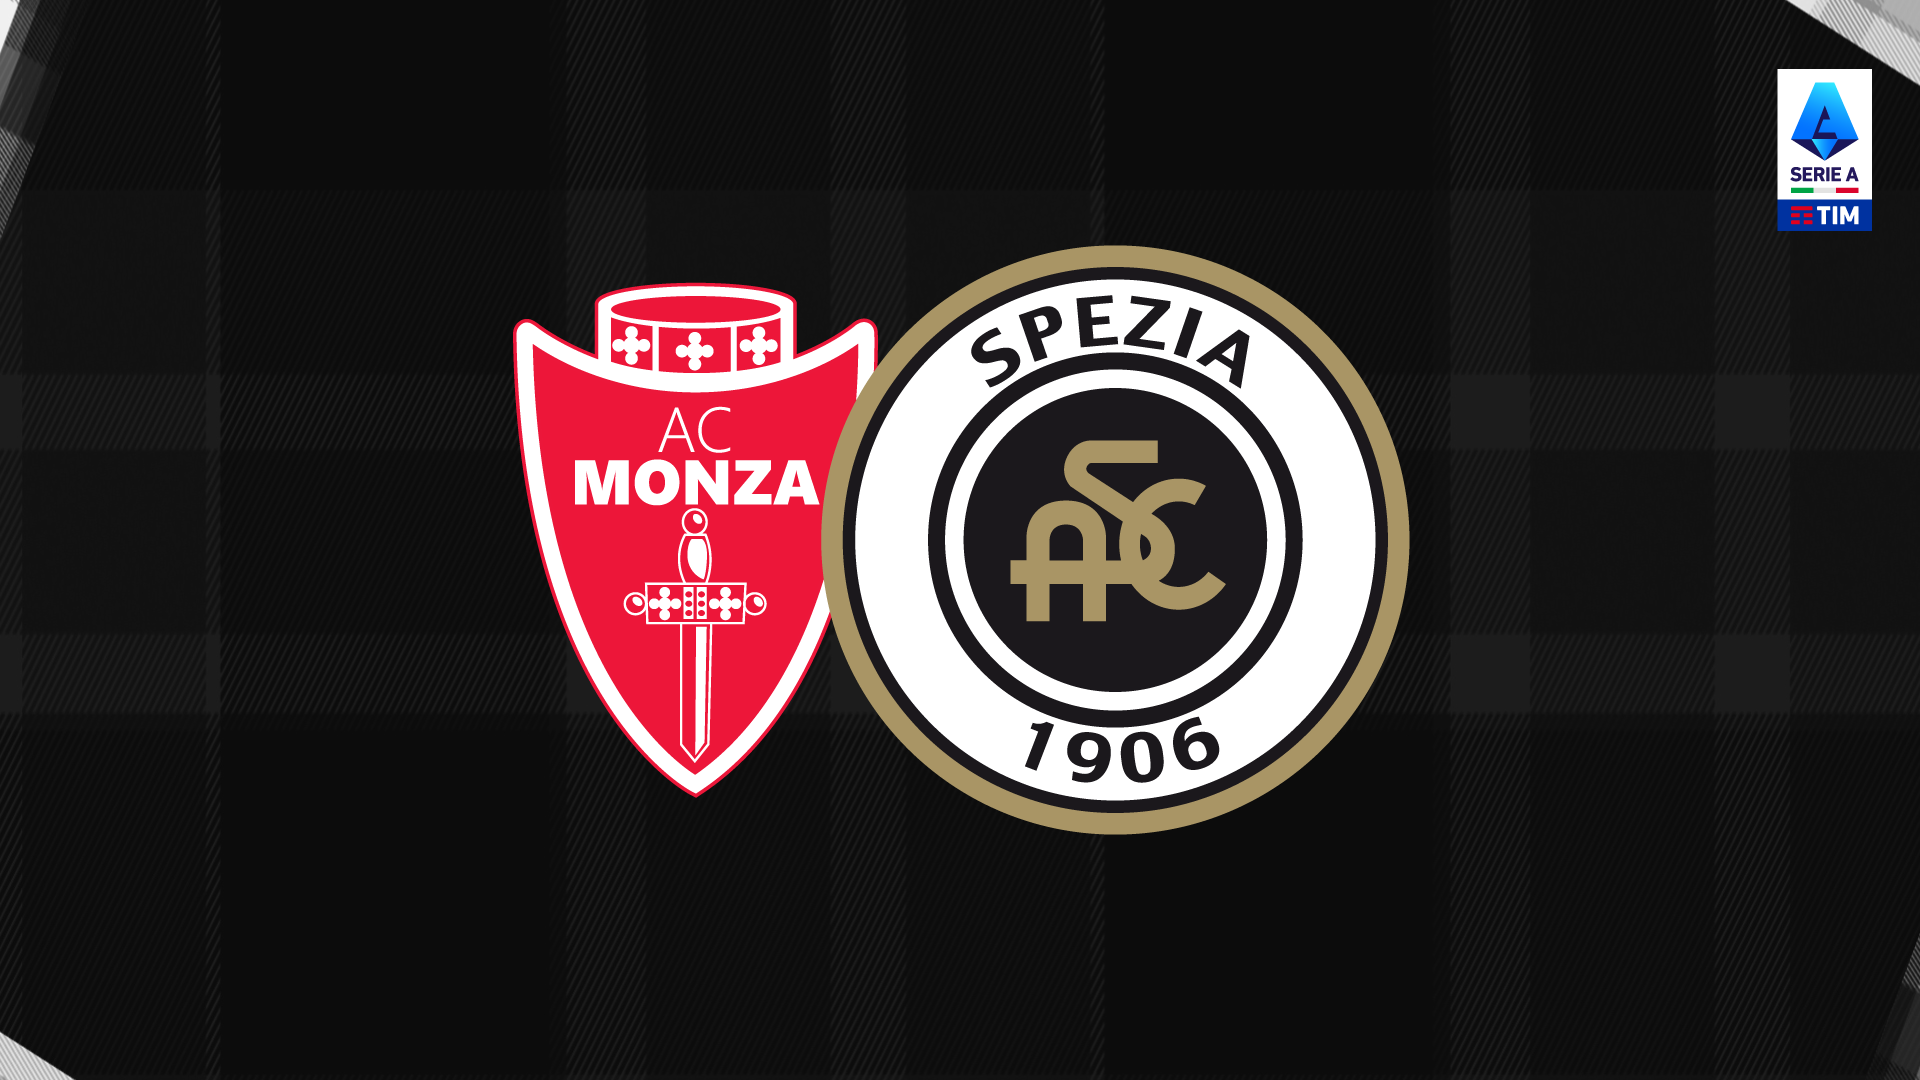 Monza-Spezia: pre-sale available for the guest sector